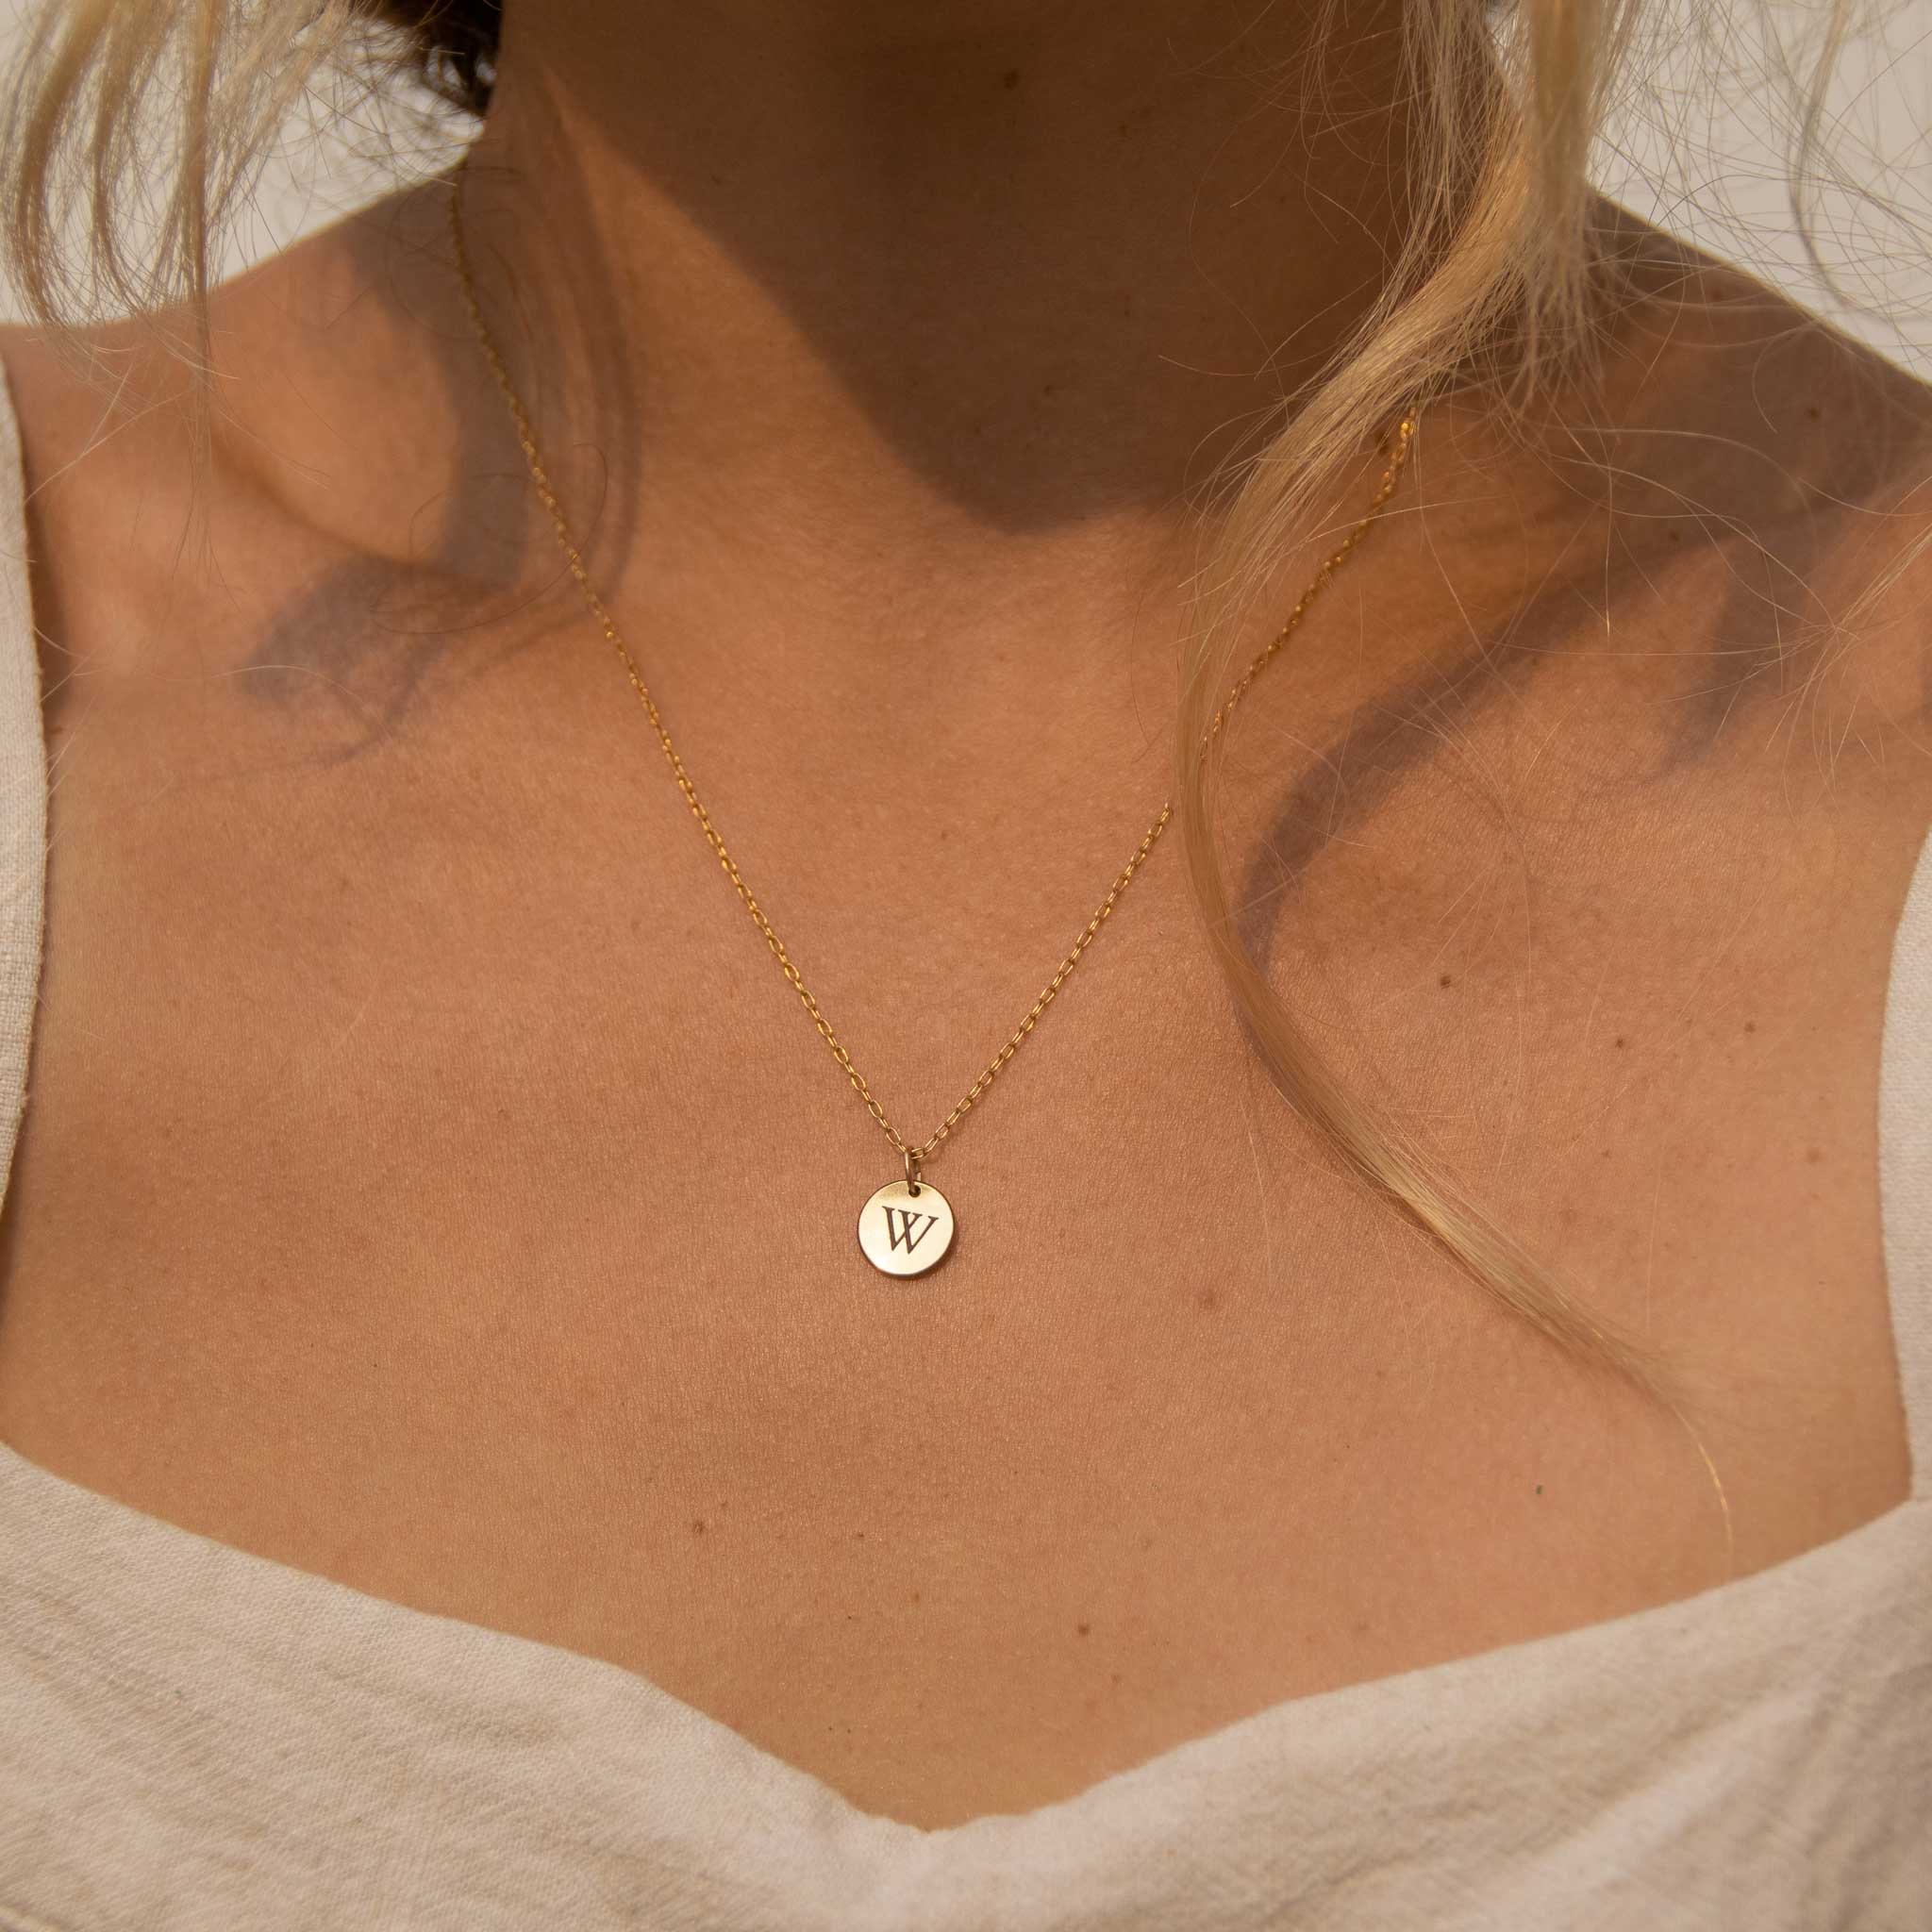 Gold Initial Disc Necklace by Megu's Attic